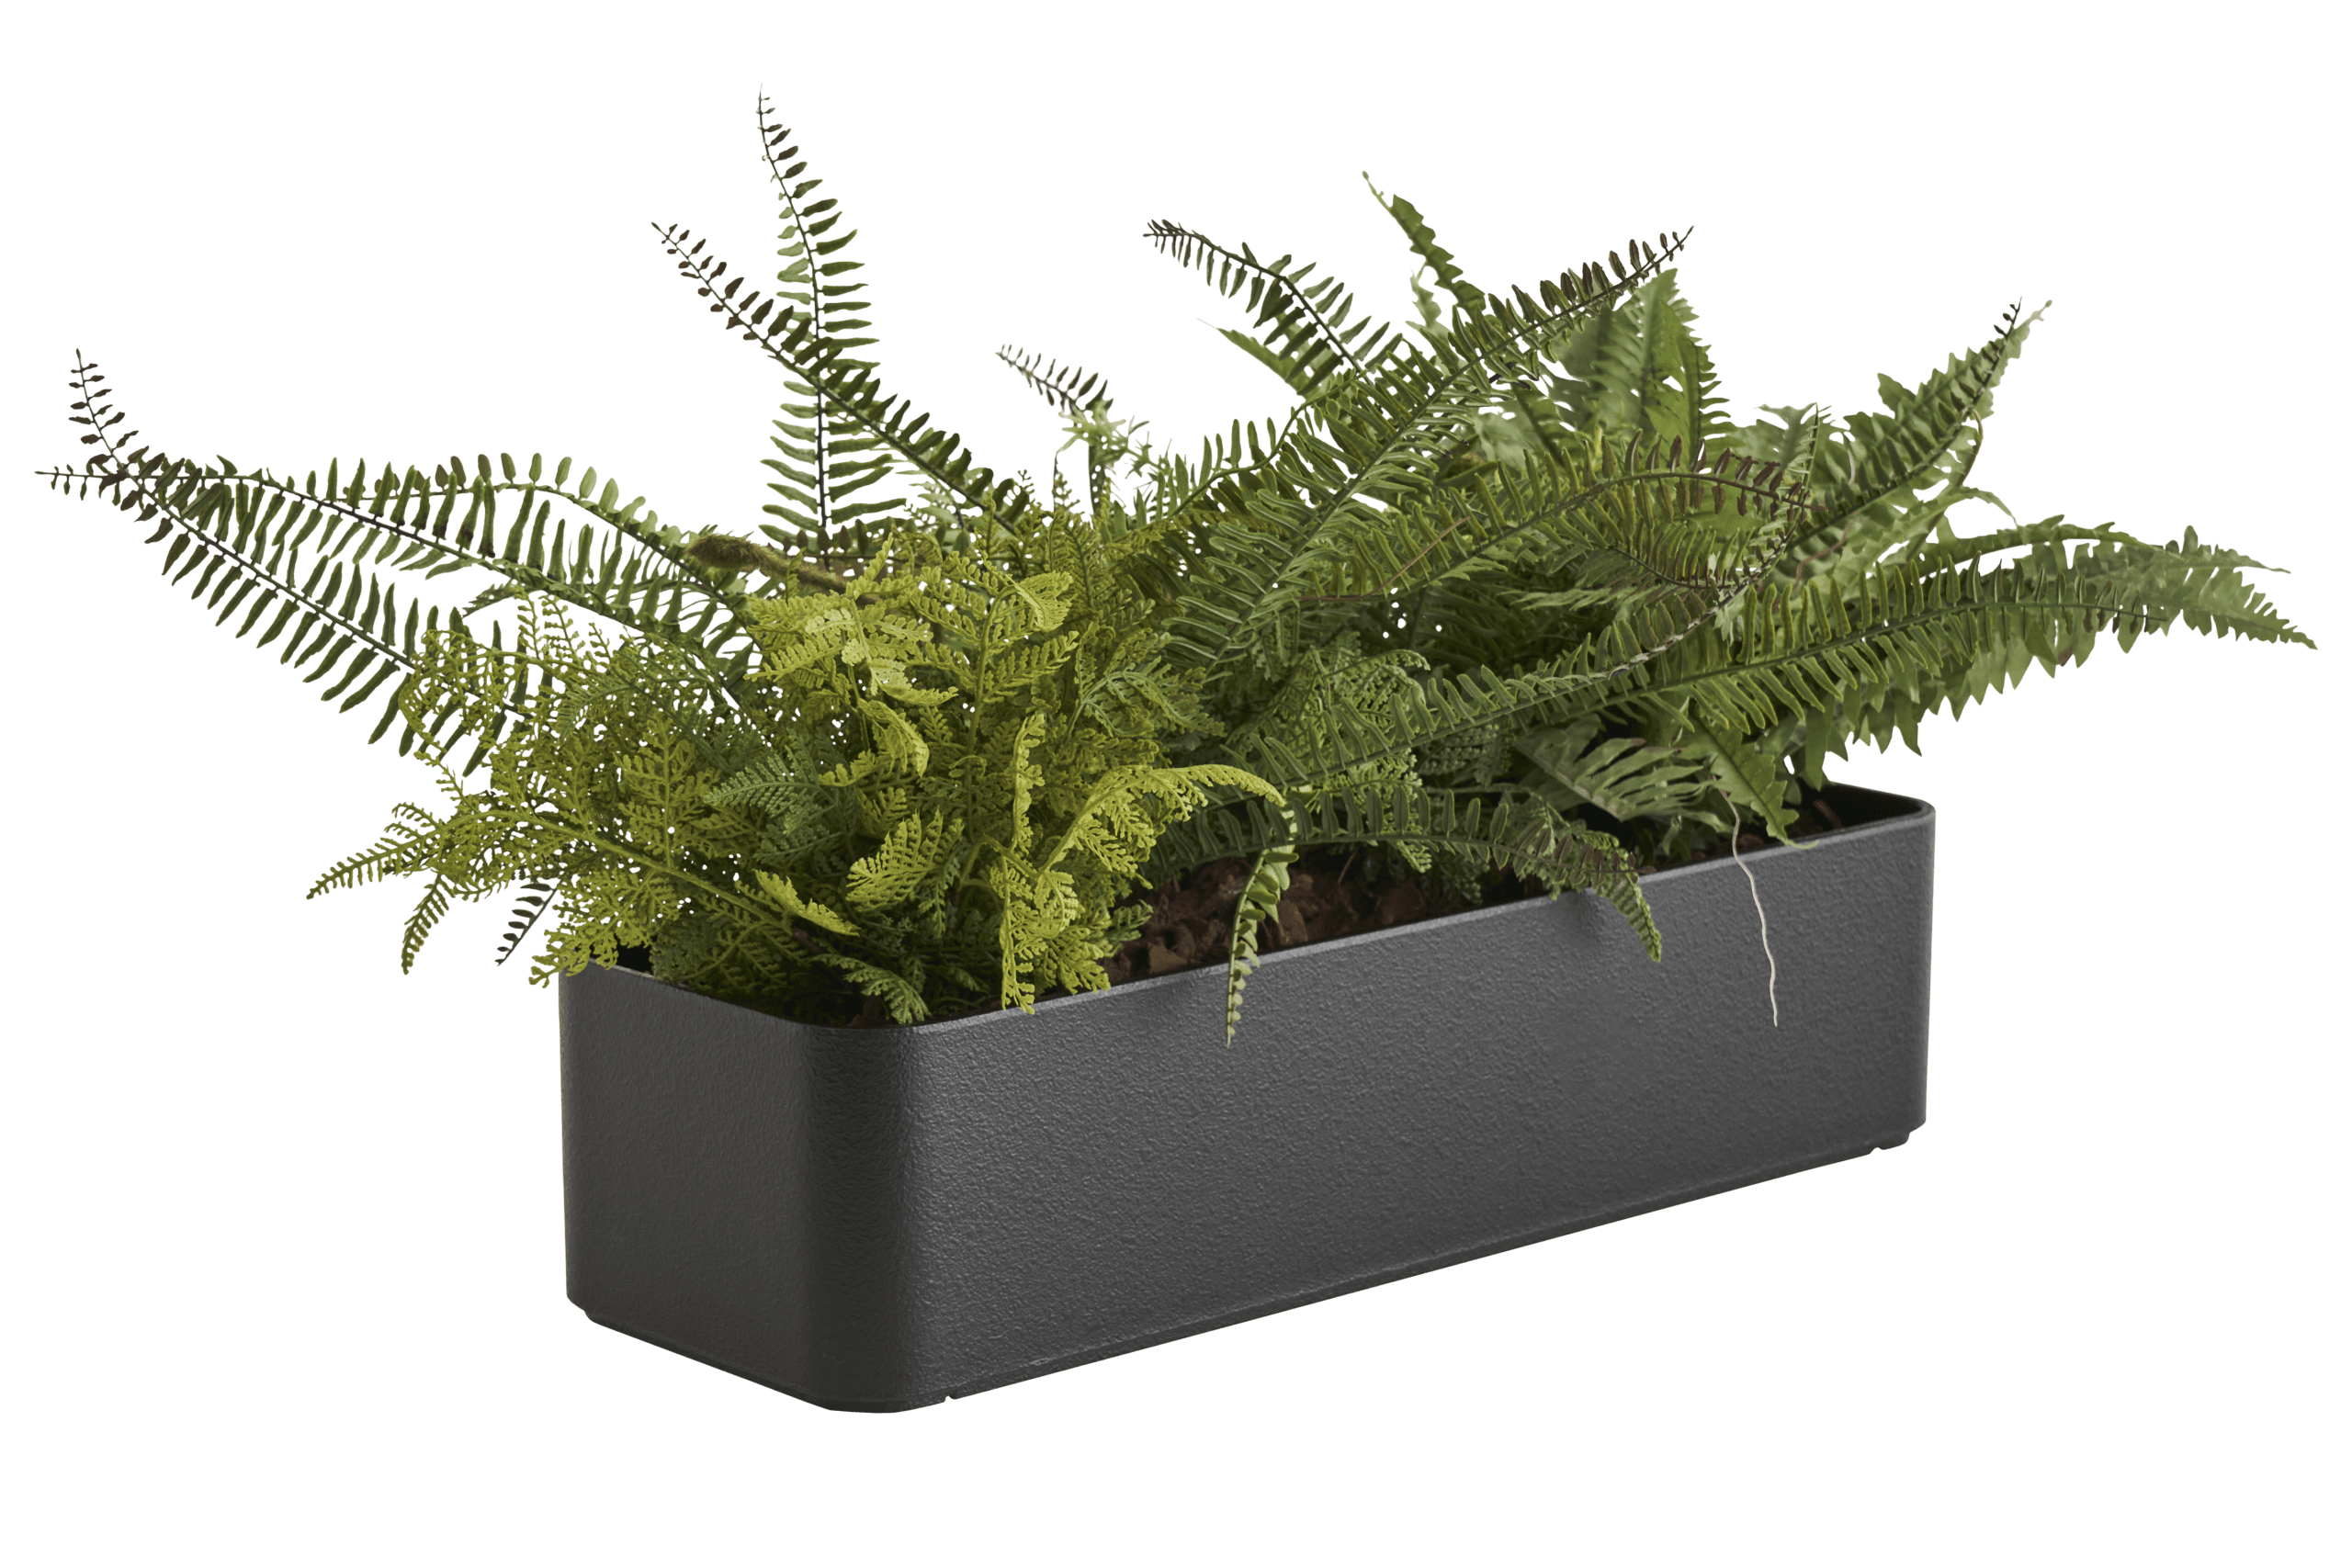 6000 0443 Flower Box Recycled with artficial plants